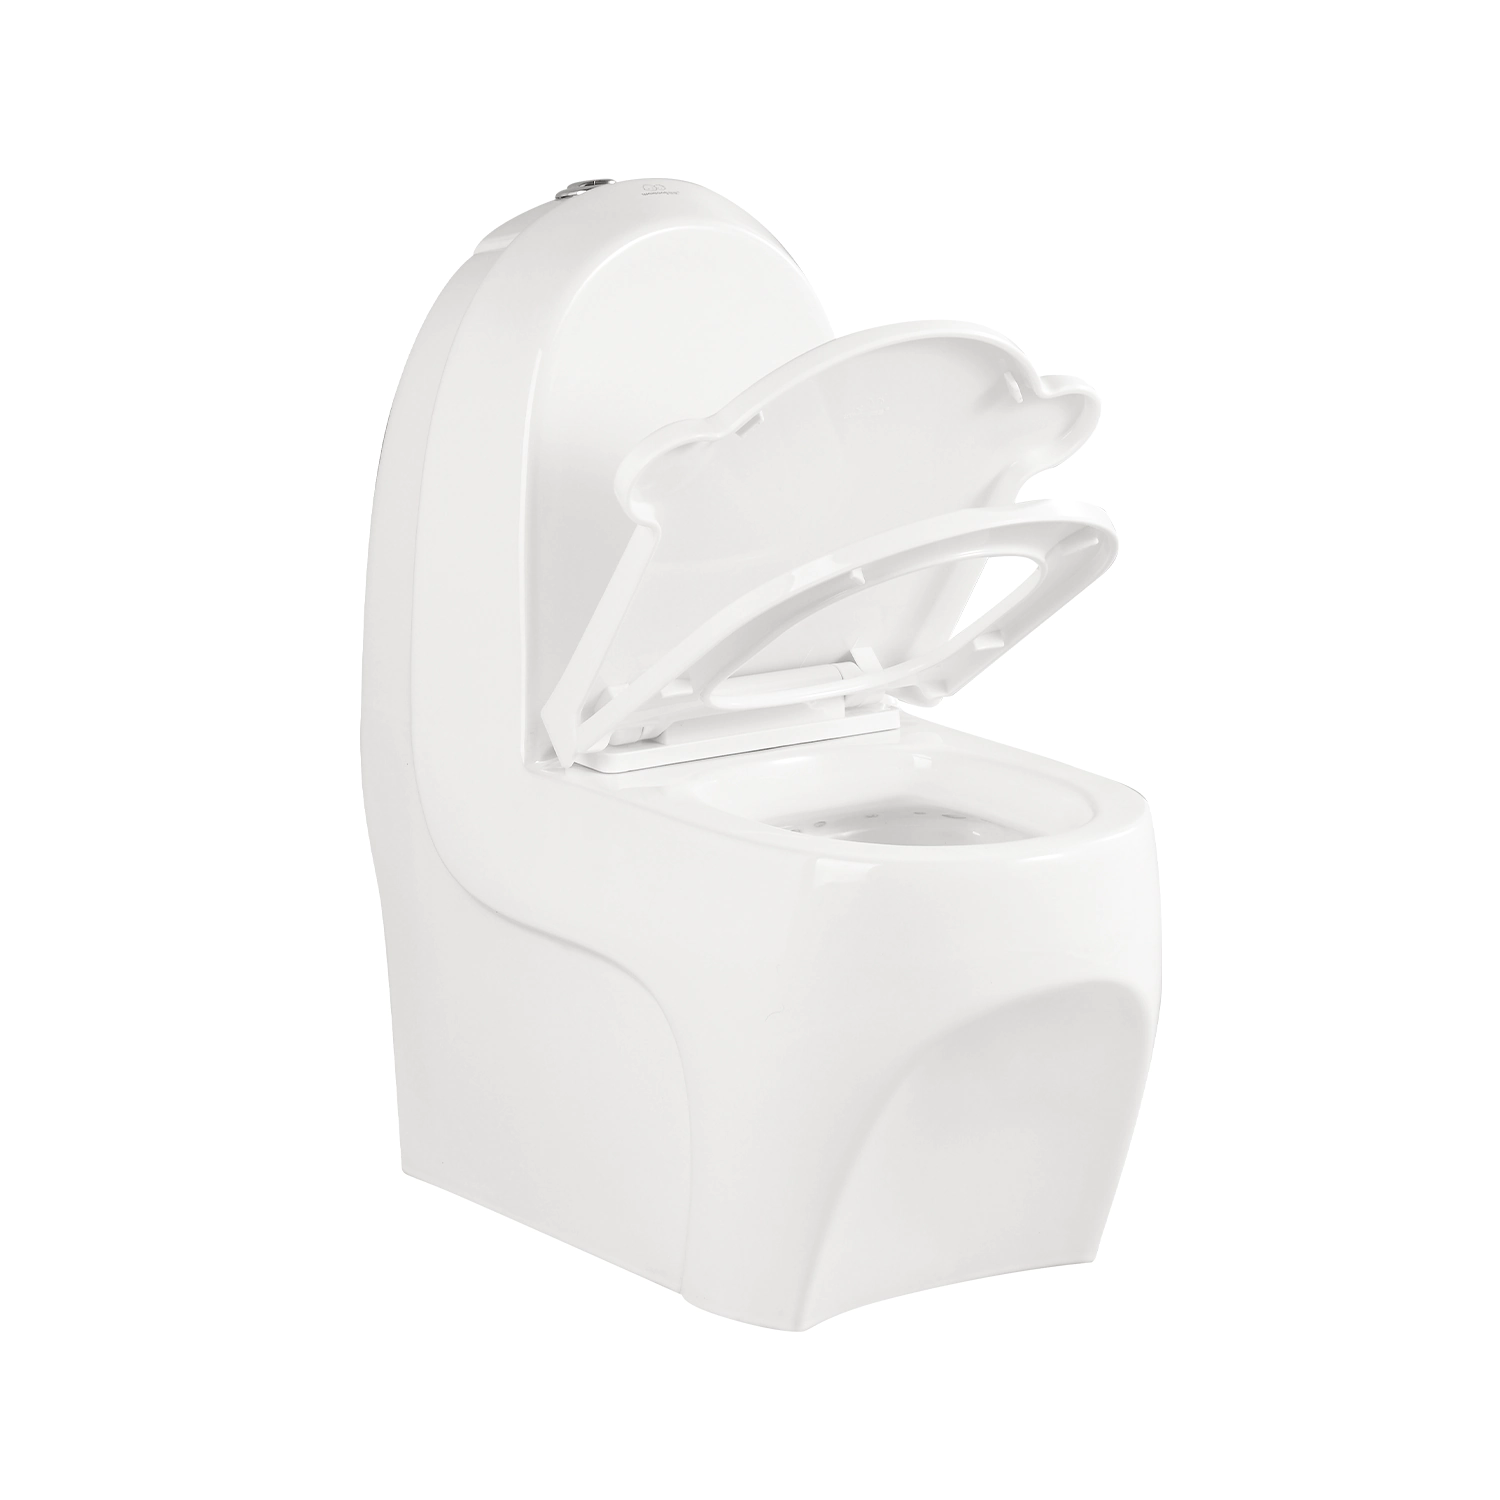 ceramic toddler potty toilet manufacturer in china, Waxiang ceramics